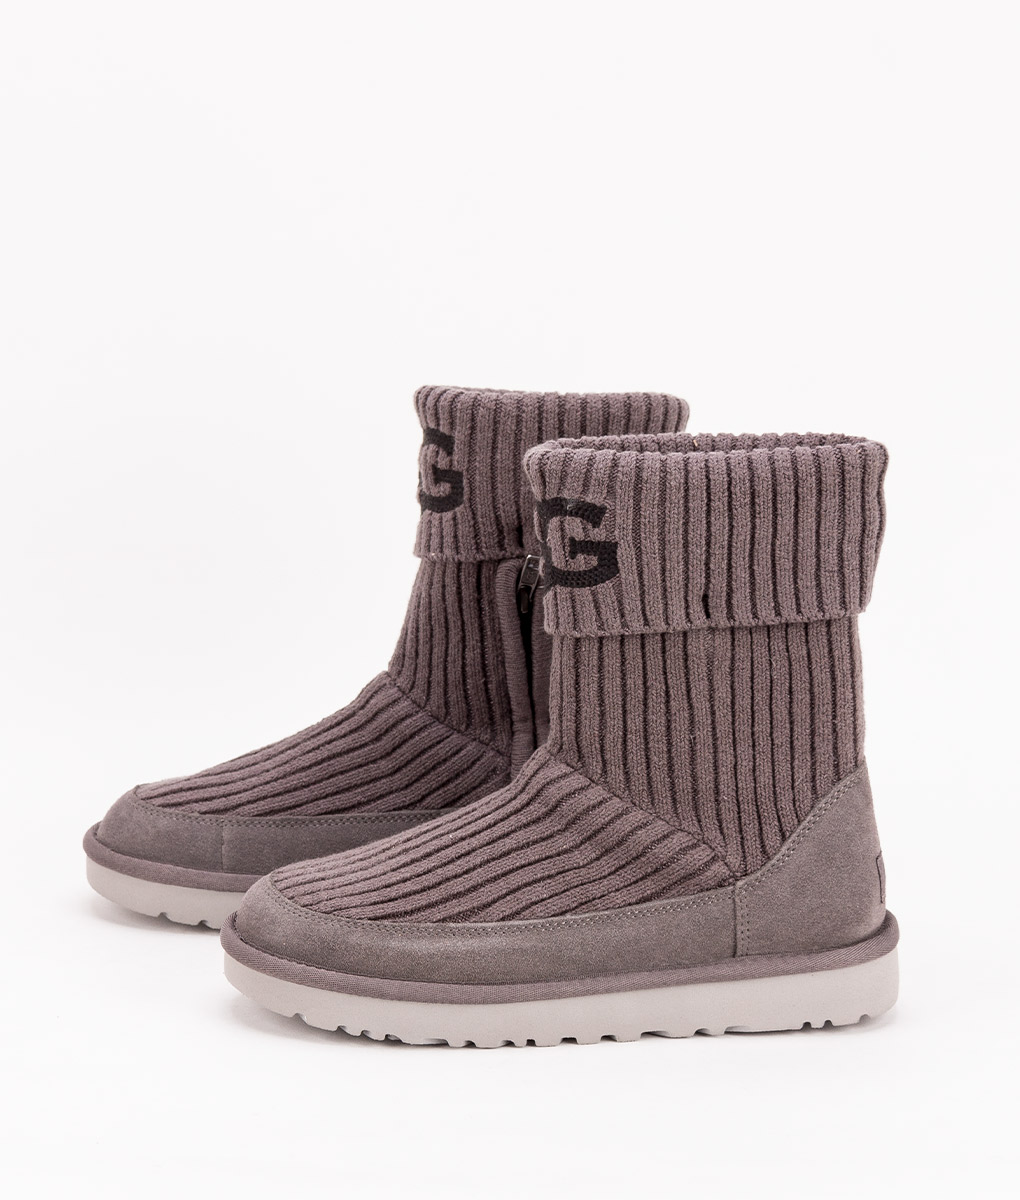 ugg classic knit boot